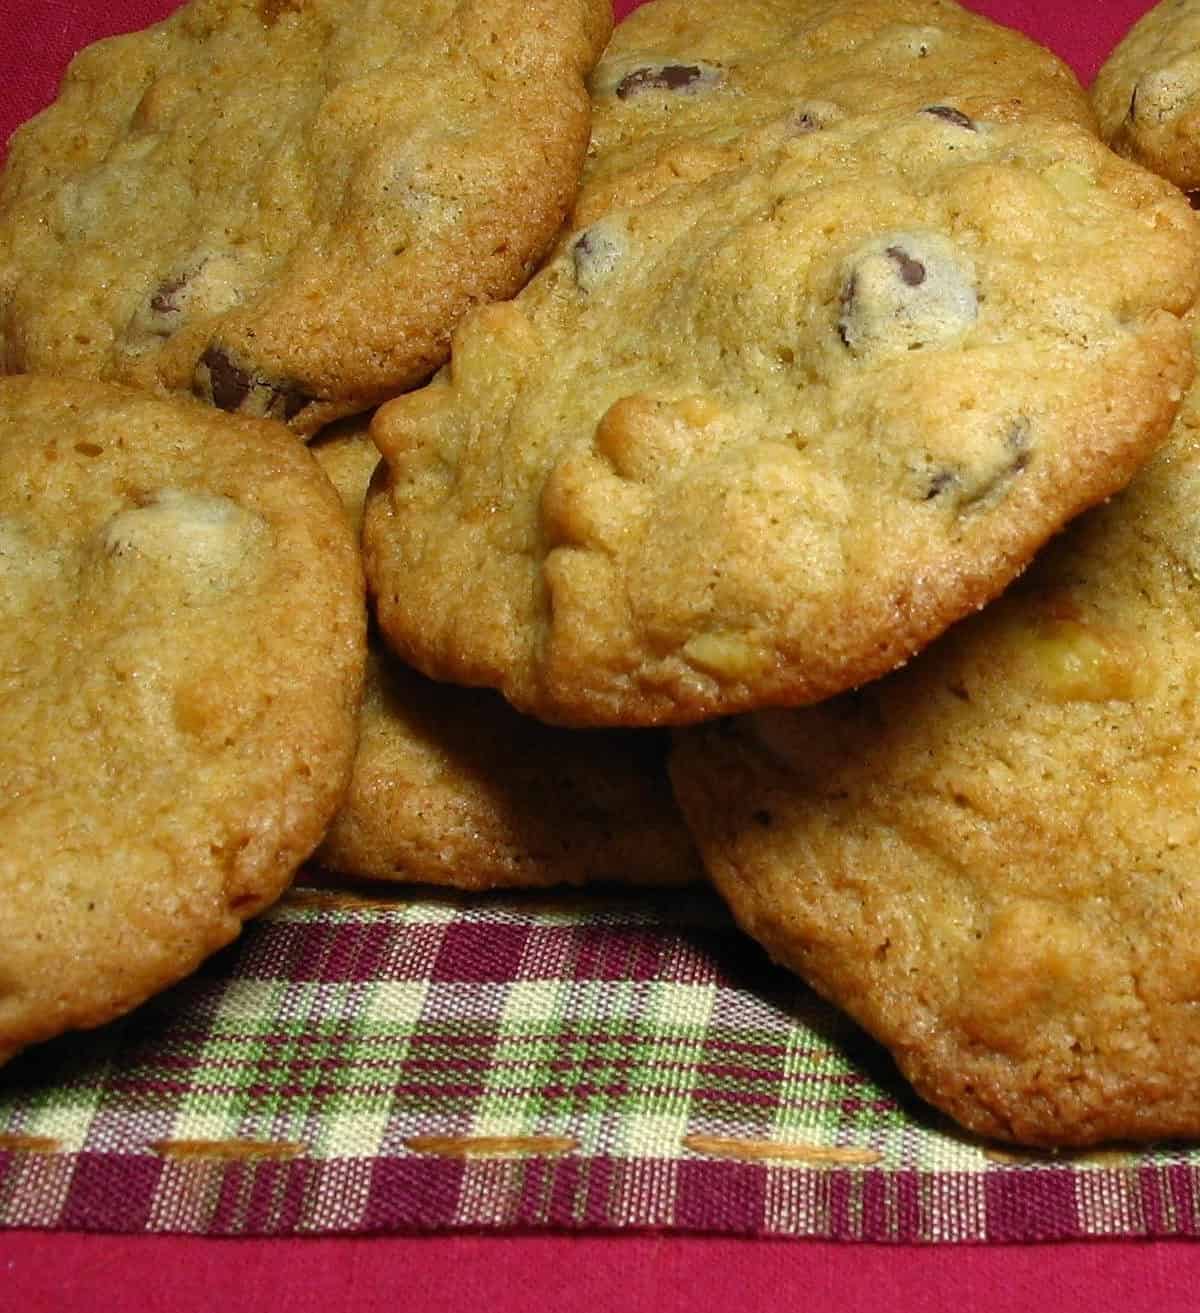  Soft, chewy and sinfully delicious – that's what these cookies are!